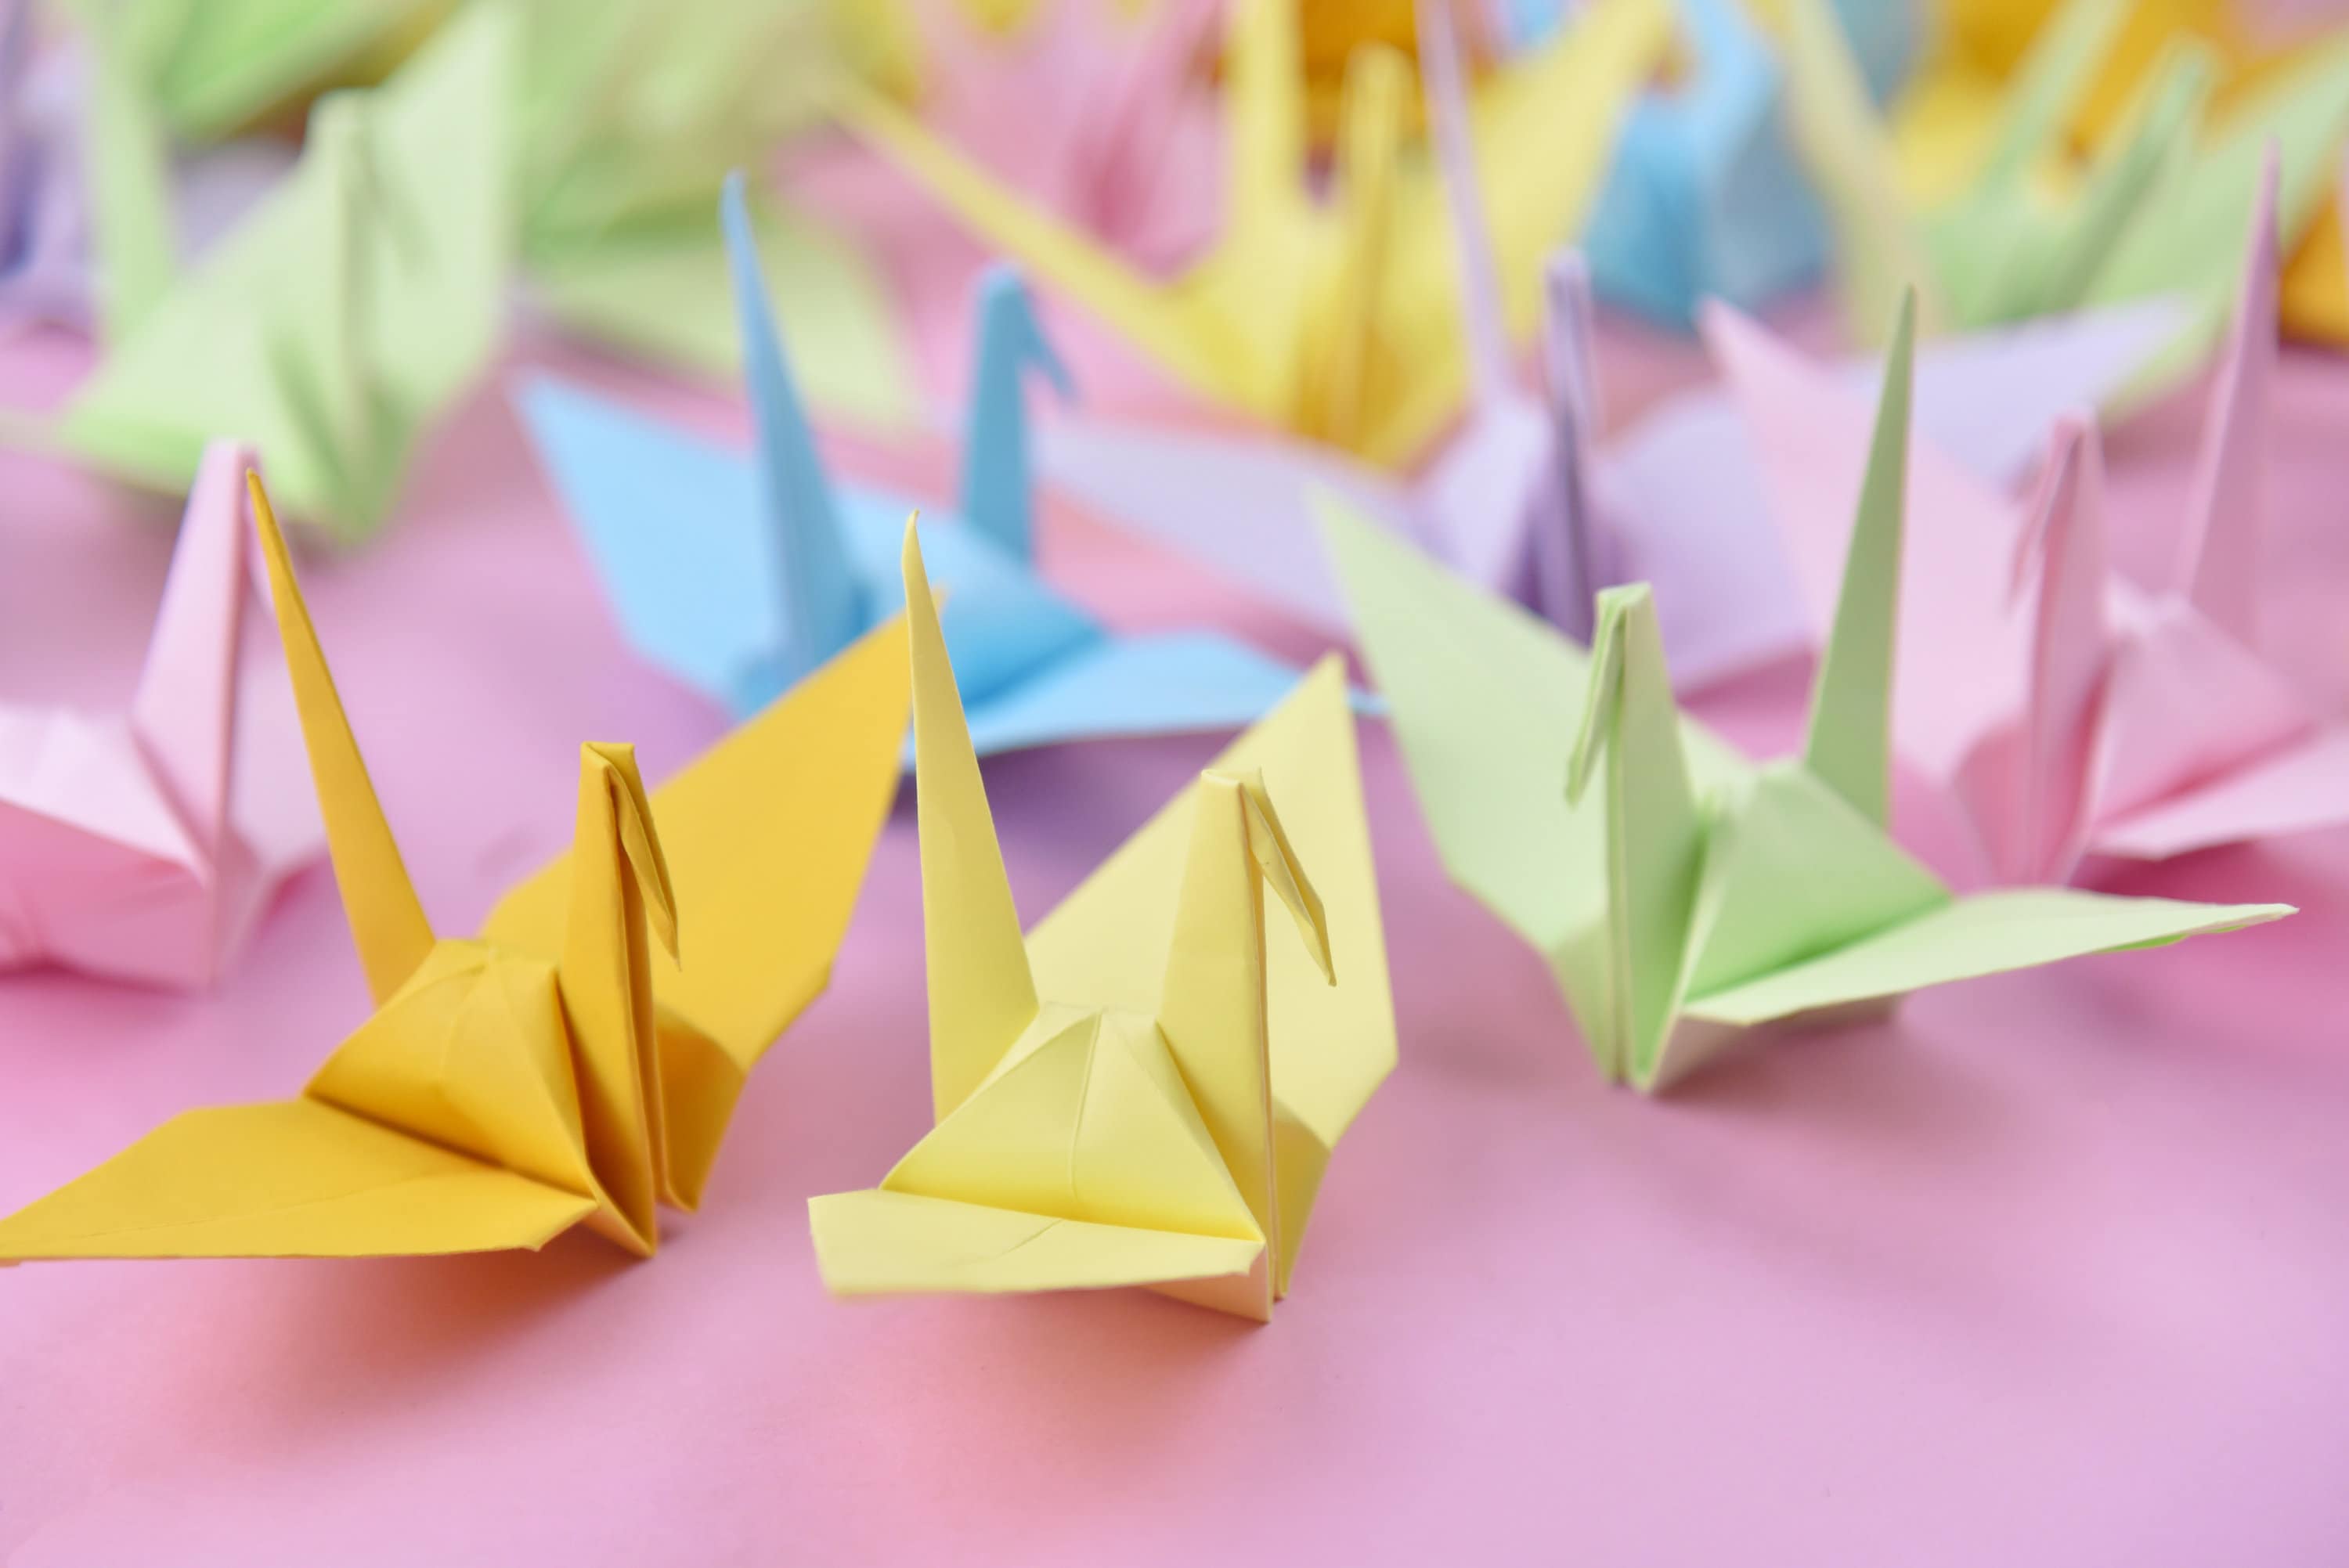 50 Origami Paper Cranes Mixed color Sweet color Large 6 inches Bird Origami Crane 15 cm 6 inches for Japanese Wedding gift